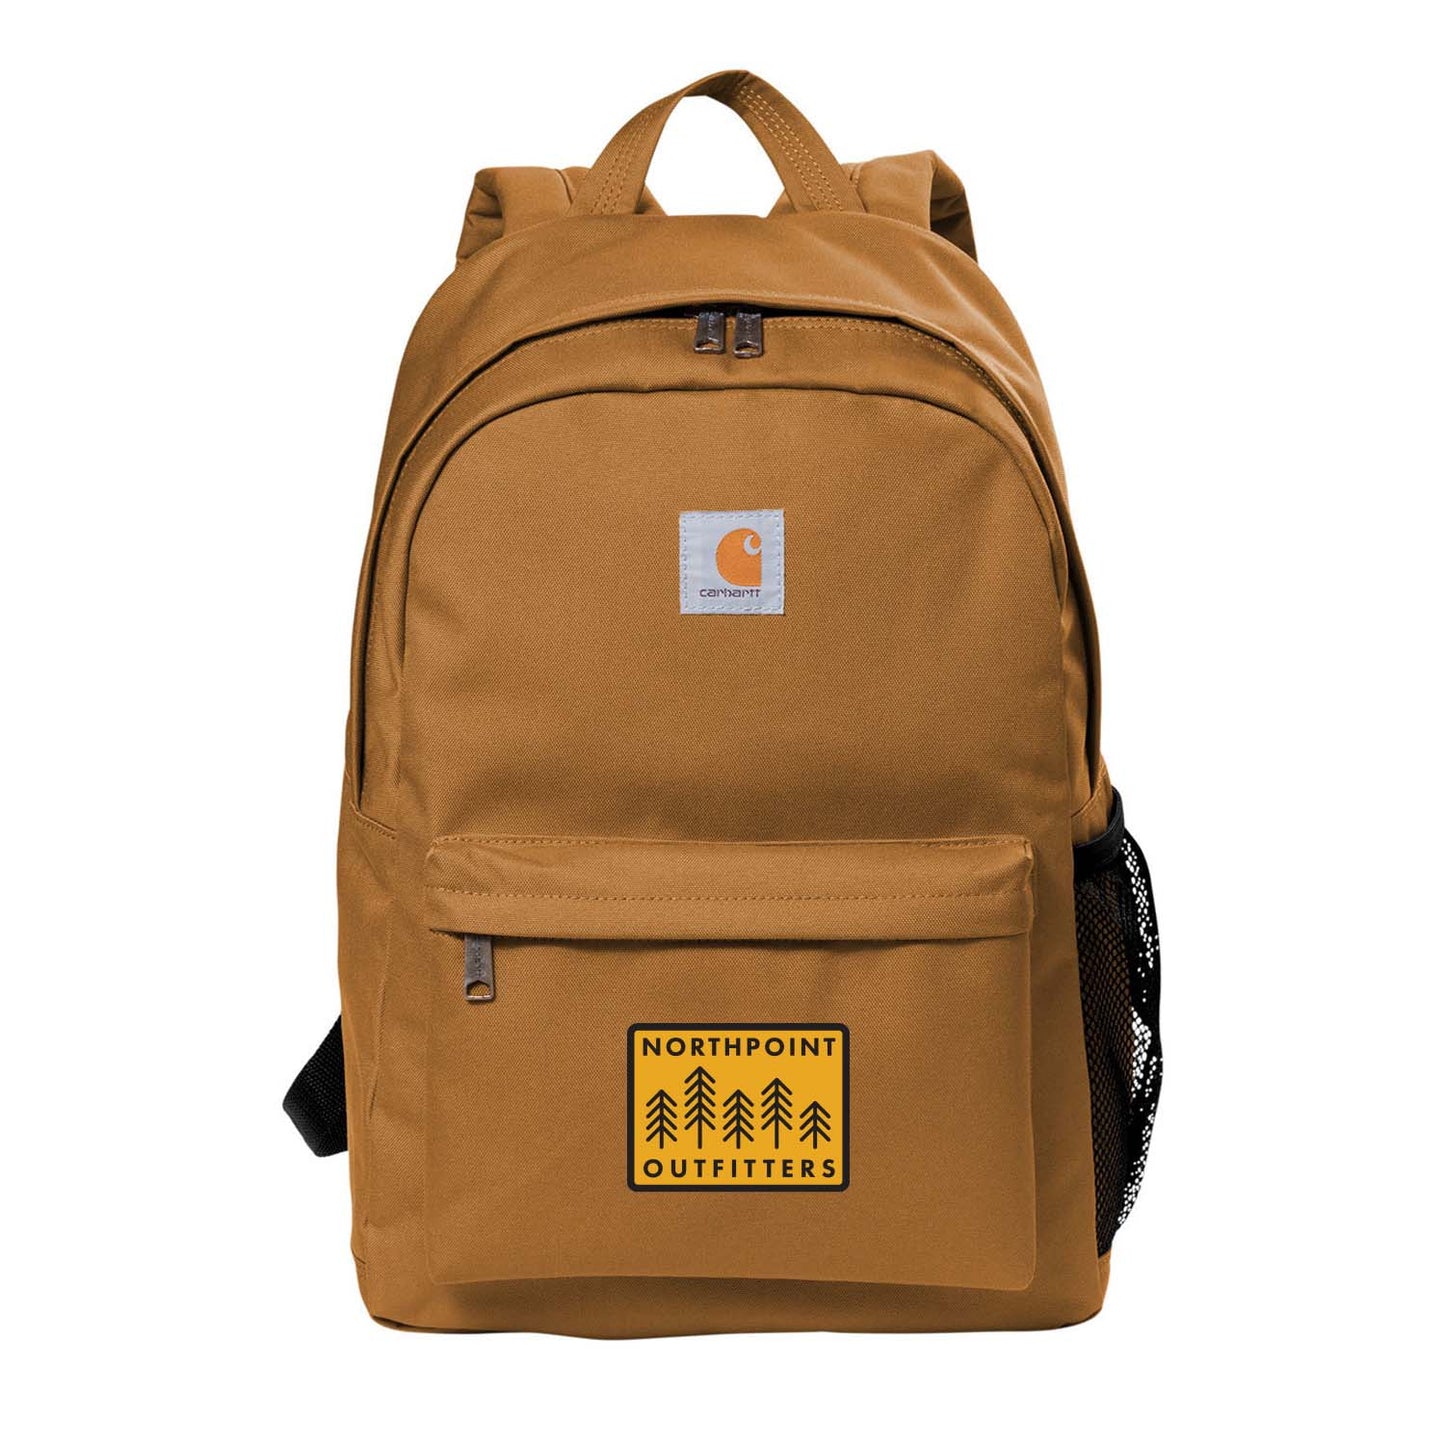 Carhartt x NorthPoint Outfitters Canvas Backpack